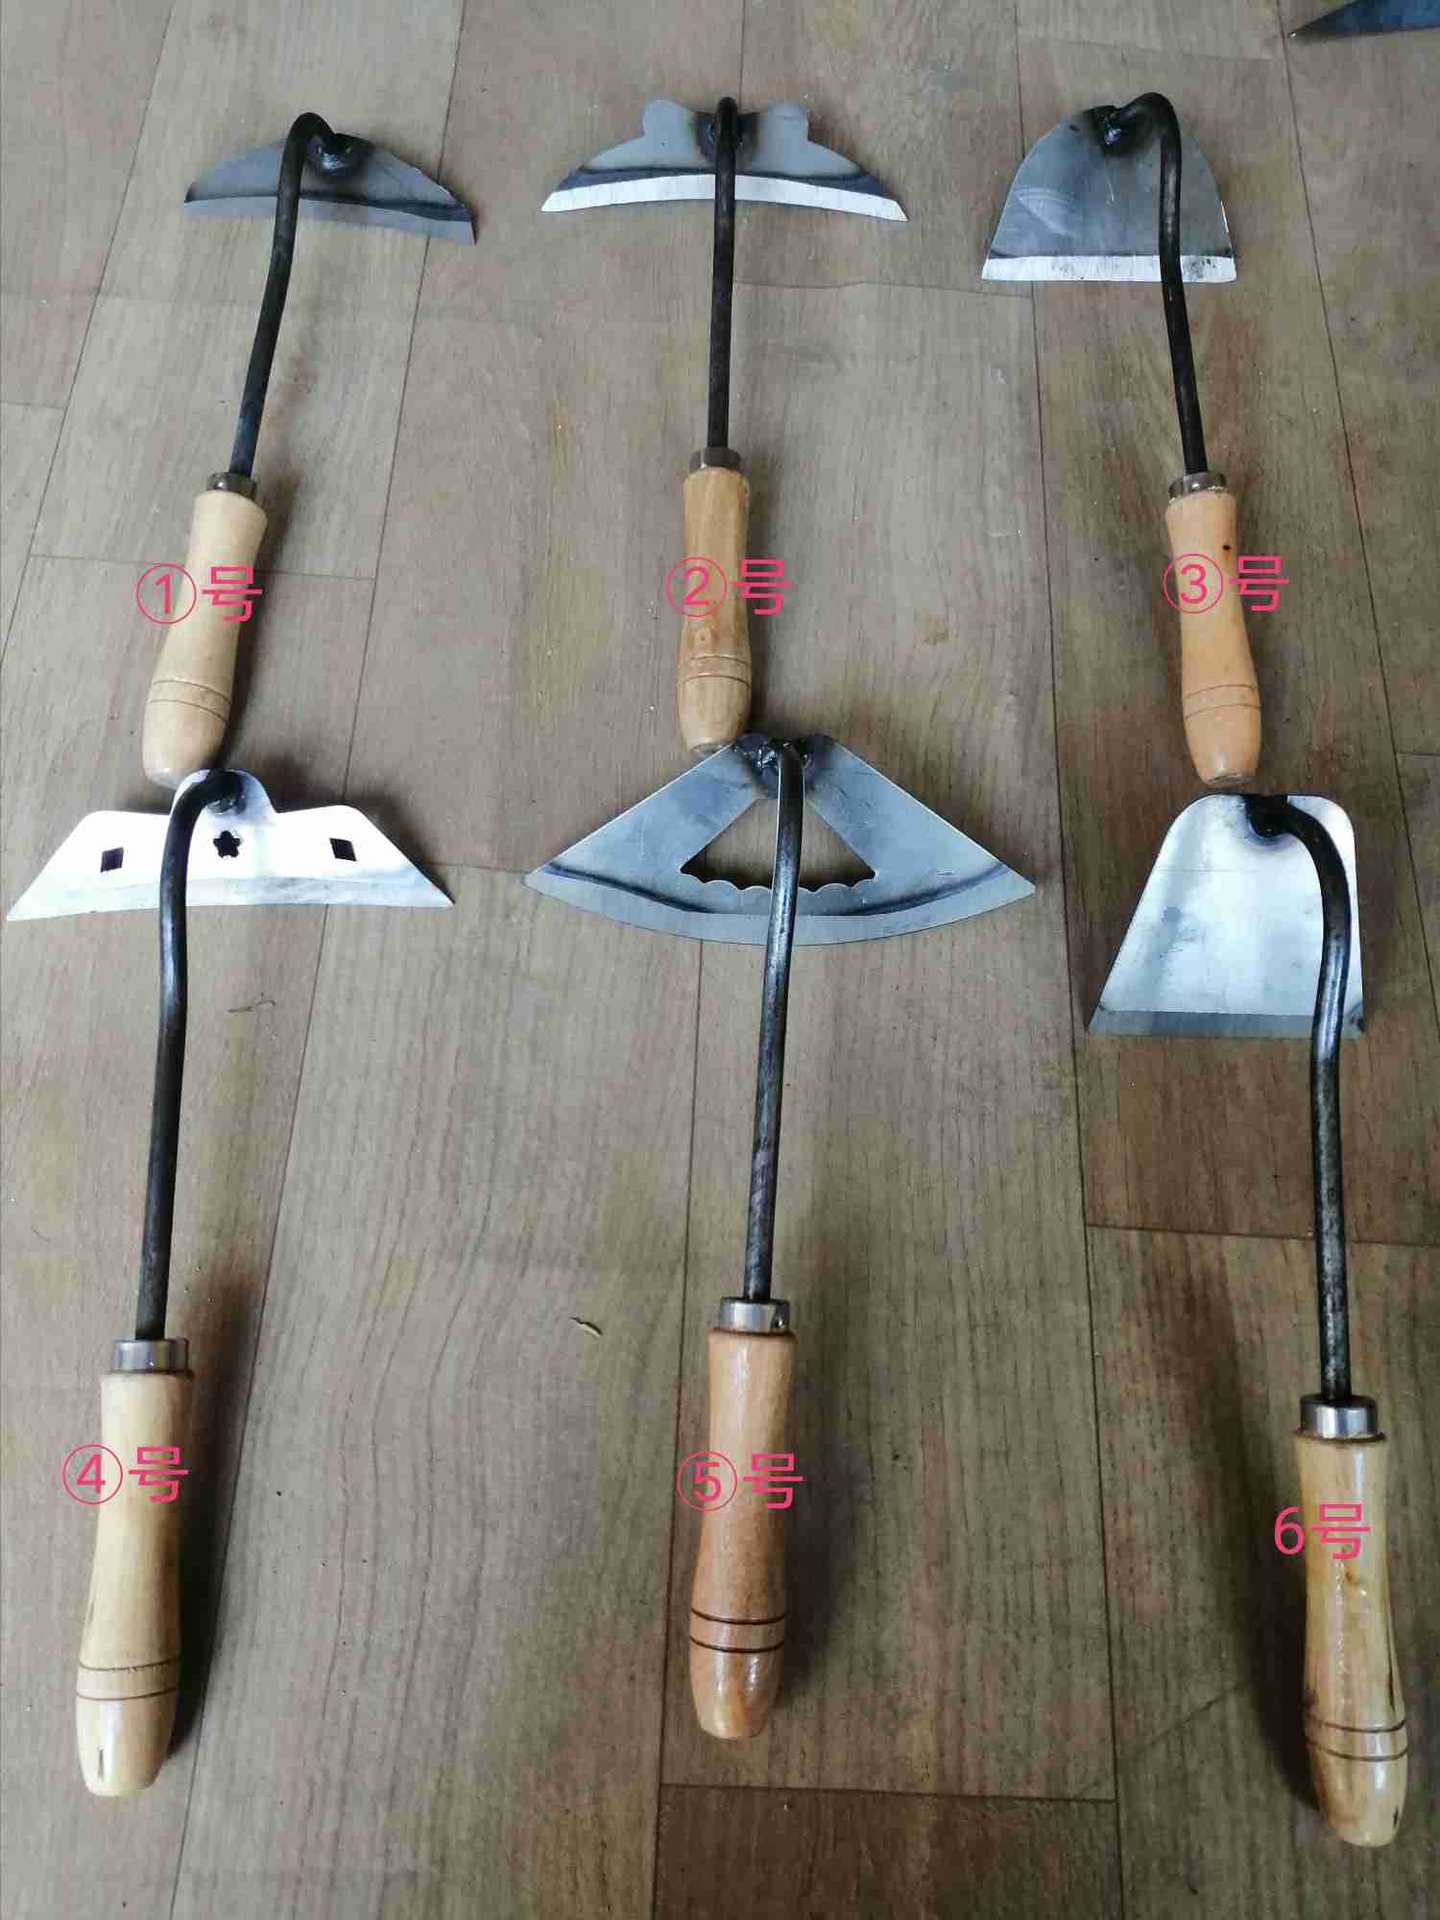 Hoe Hand Hoe Wooden Handle Small Hoe Library Hoe Hollow Hoe All Steel Hoe Weeding and Wasteland Hoe Home Gardening Hoe